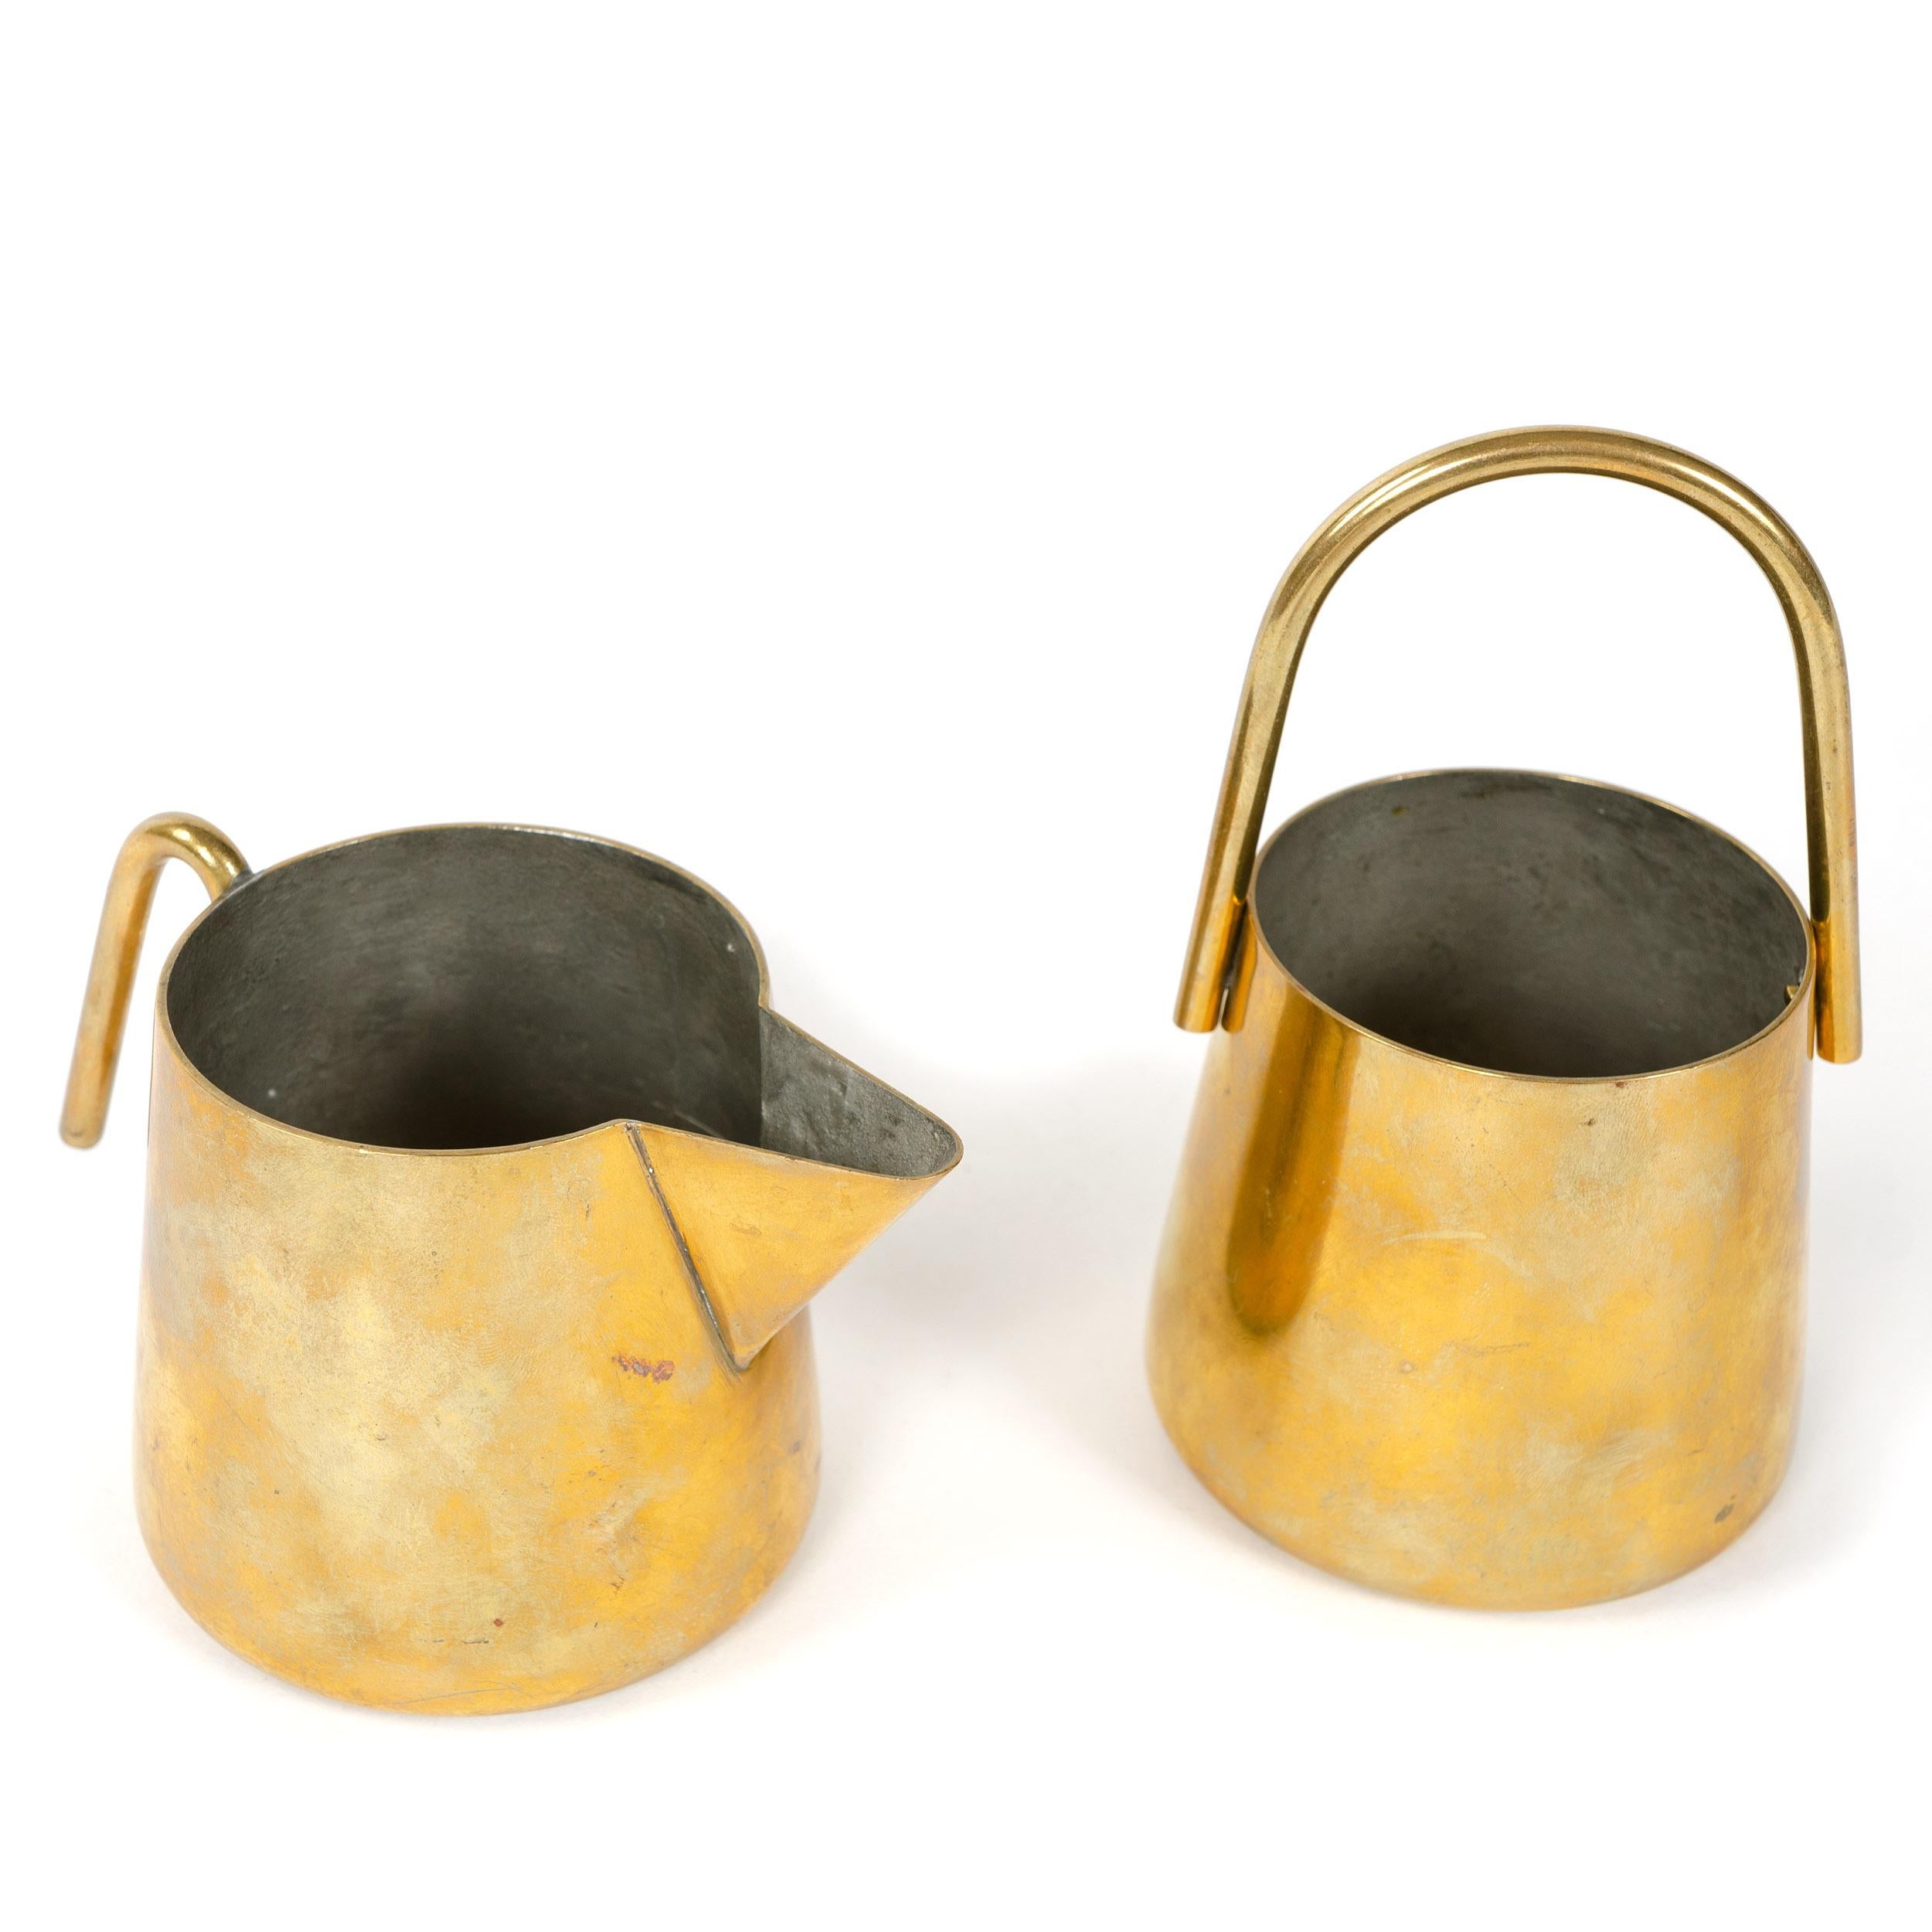 A Mid-Century Modern brass cream and sugar set designed by Carl Aubock. Designed and made in Austria, 1950s.